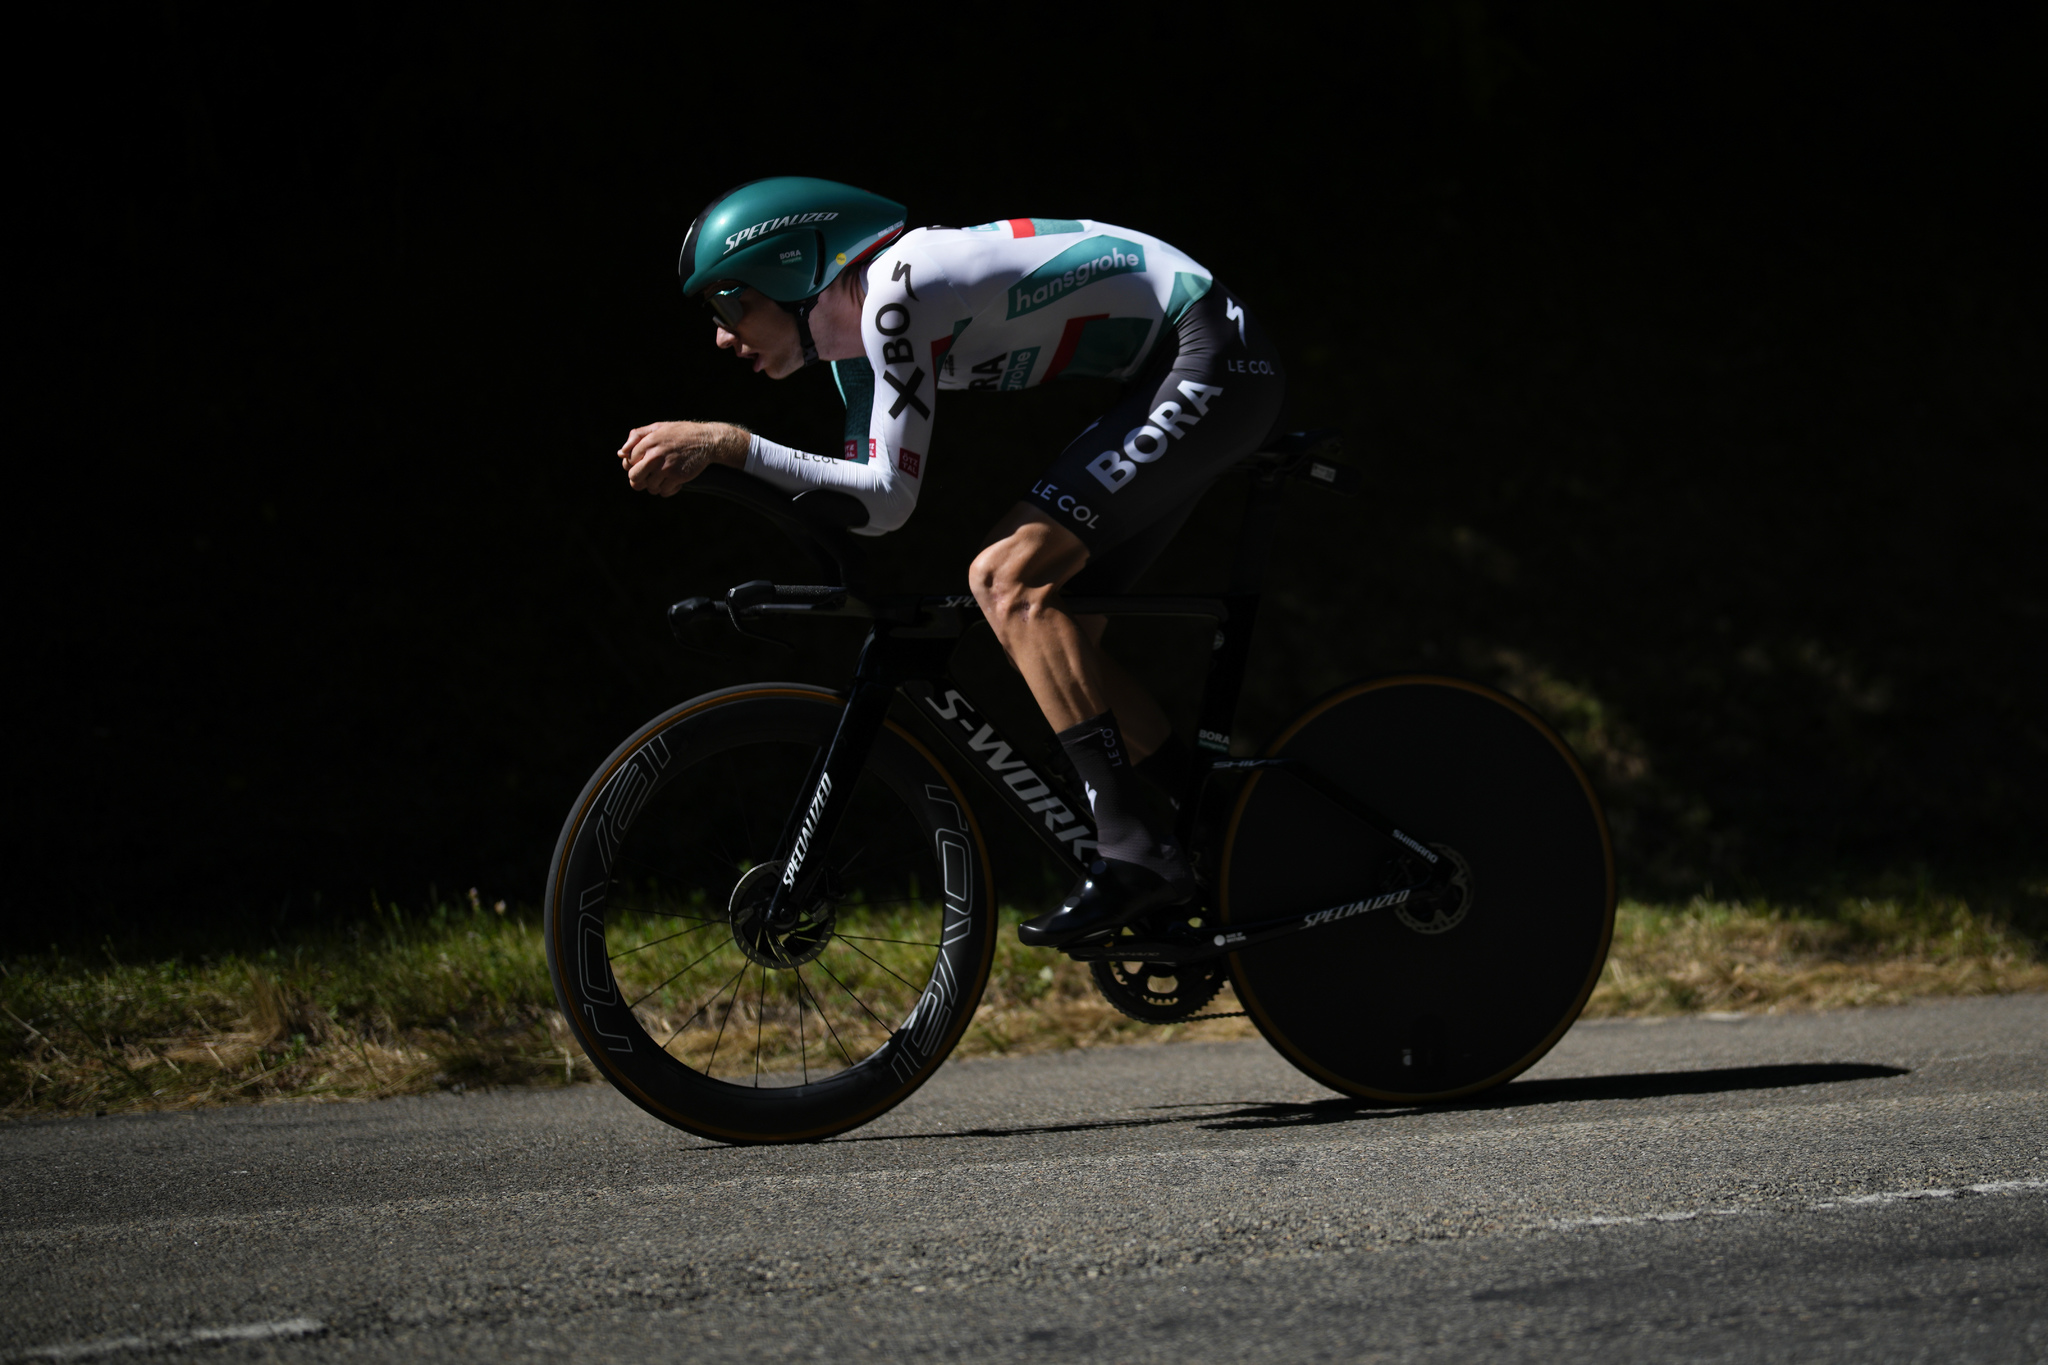 Russia' Aleksandr  lt;HIT gt;Vlasov lt;/HIT gt; rides during the twentieth stage of the Tour de France cycling race, an individual time trial over 40.7 kilometers (25.3 miles) with start in Lacapelle-Marival and finish in Rocamadour, France, Saturday, July 23, 2022. (AP Photo/Daniel Cole)